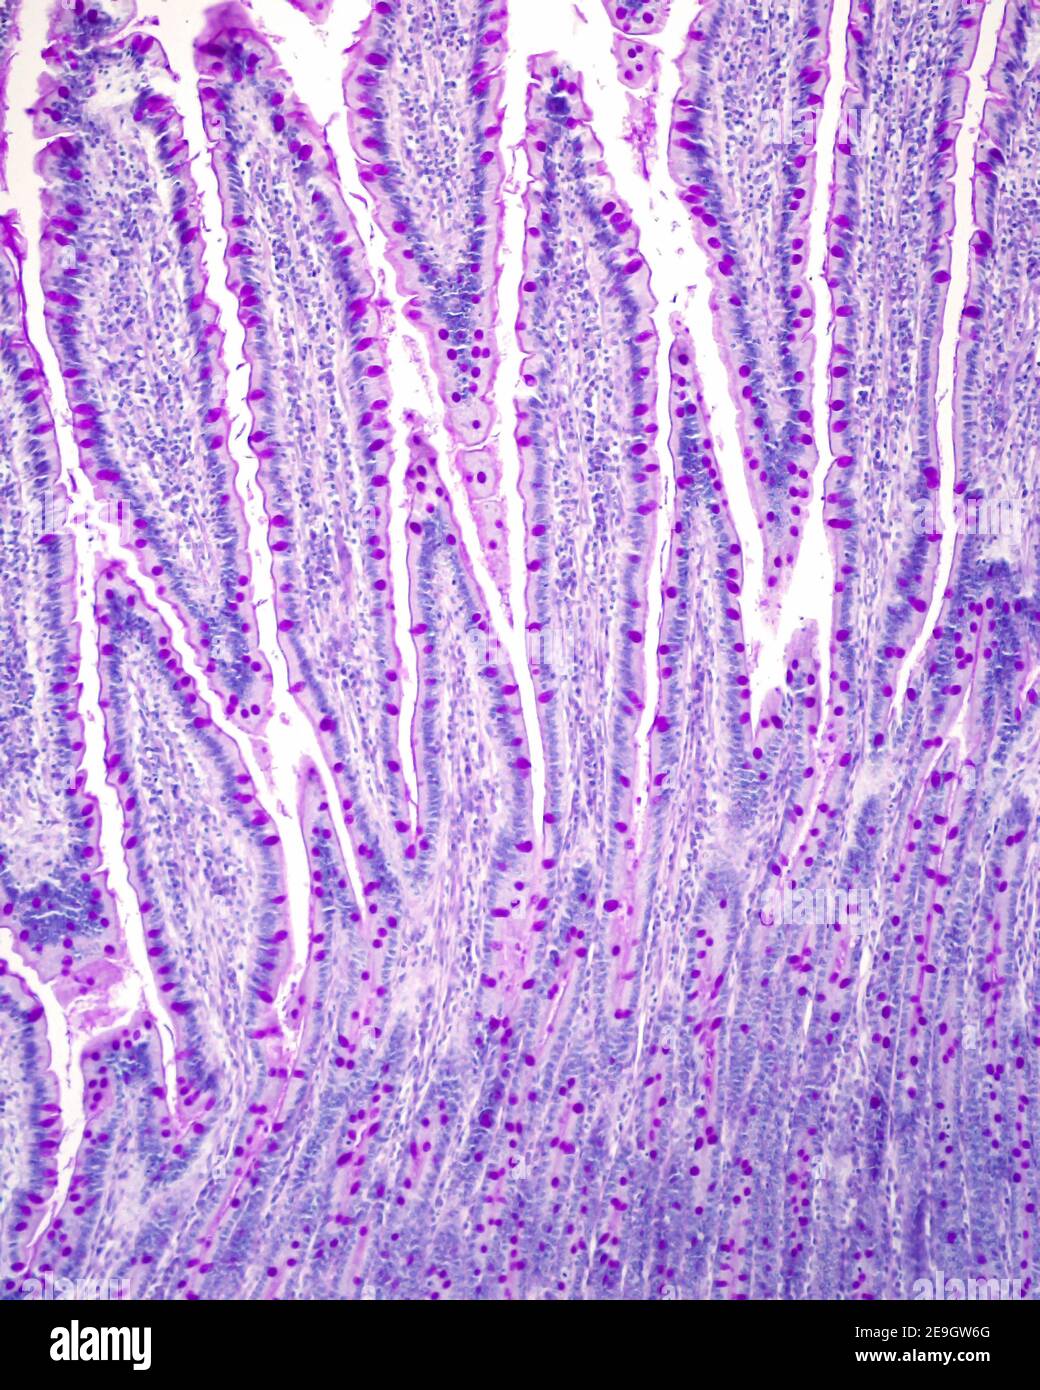 Mucosa of the small intestine showing the goblet cells of the lining epithelium of villi and crypts, stained with the Periodic Acid Schiff (PAS) stain Stock Photo